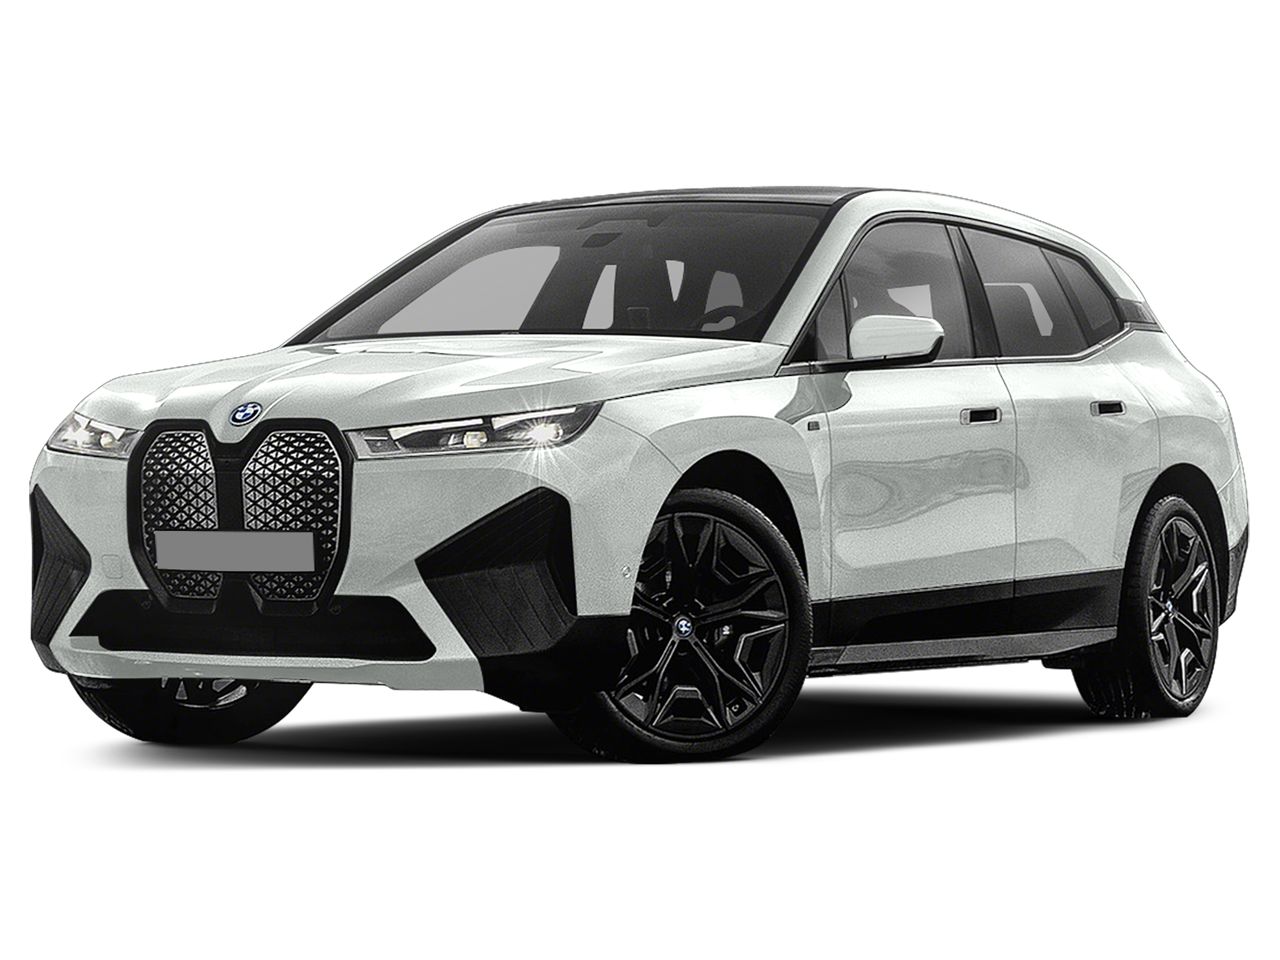 Get the B&W Option on Your xDrive50 from BMW and Customize Your Car